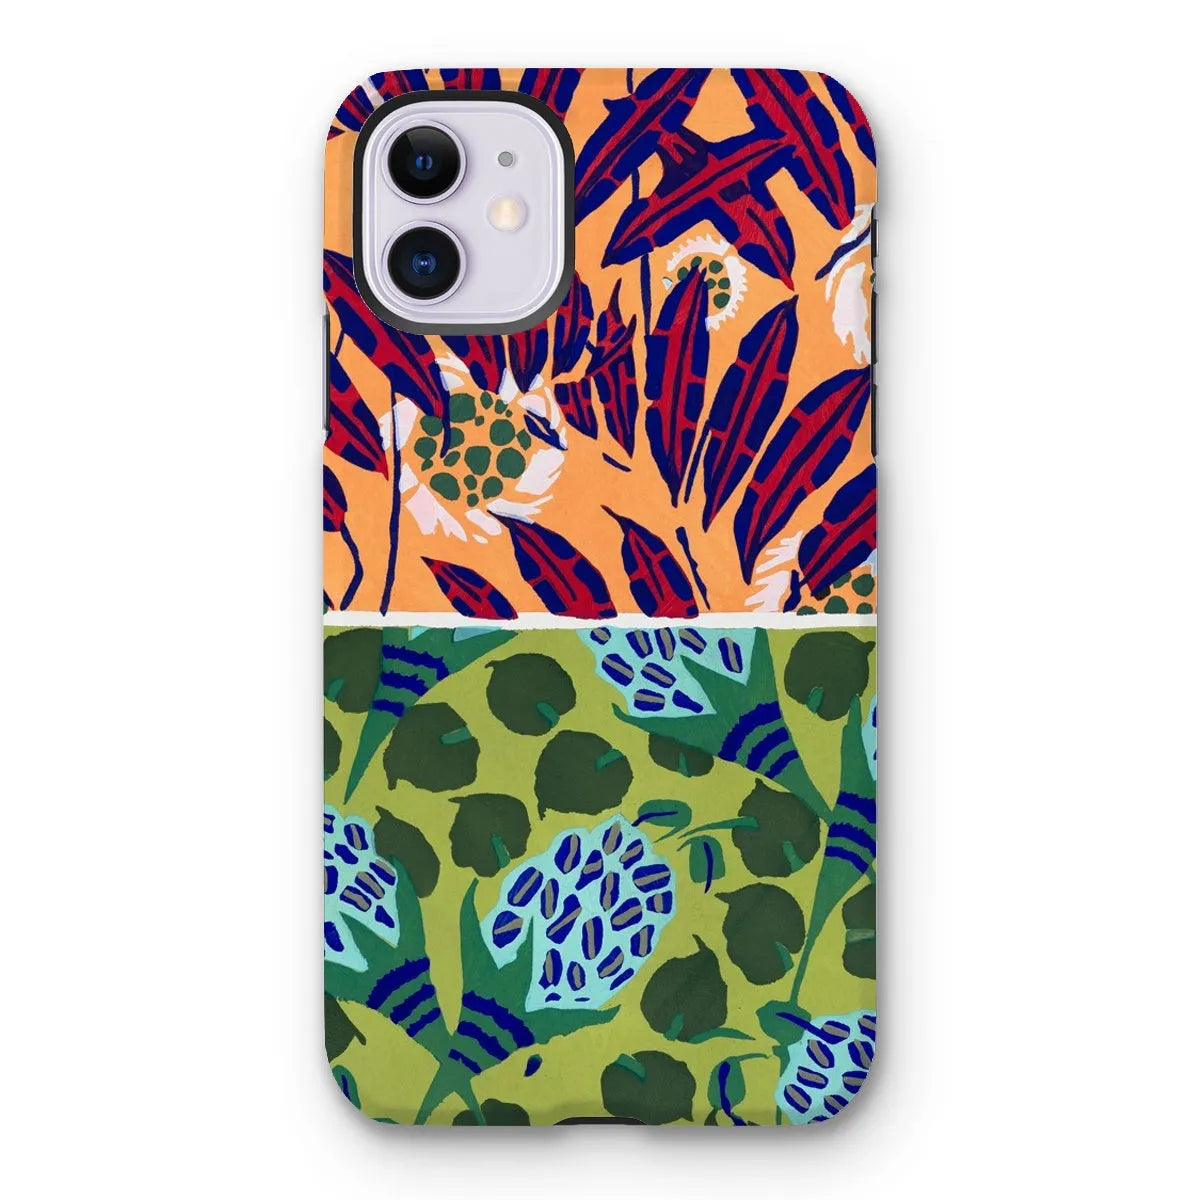 Fabric & Rugs Too - Pochoir Pattern Phone Case - E. A. Séguy - Iphone 11 / Matte - Mobile Phone Cases - Aesthetic Art